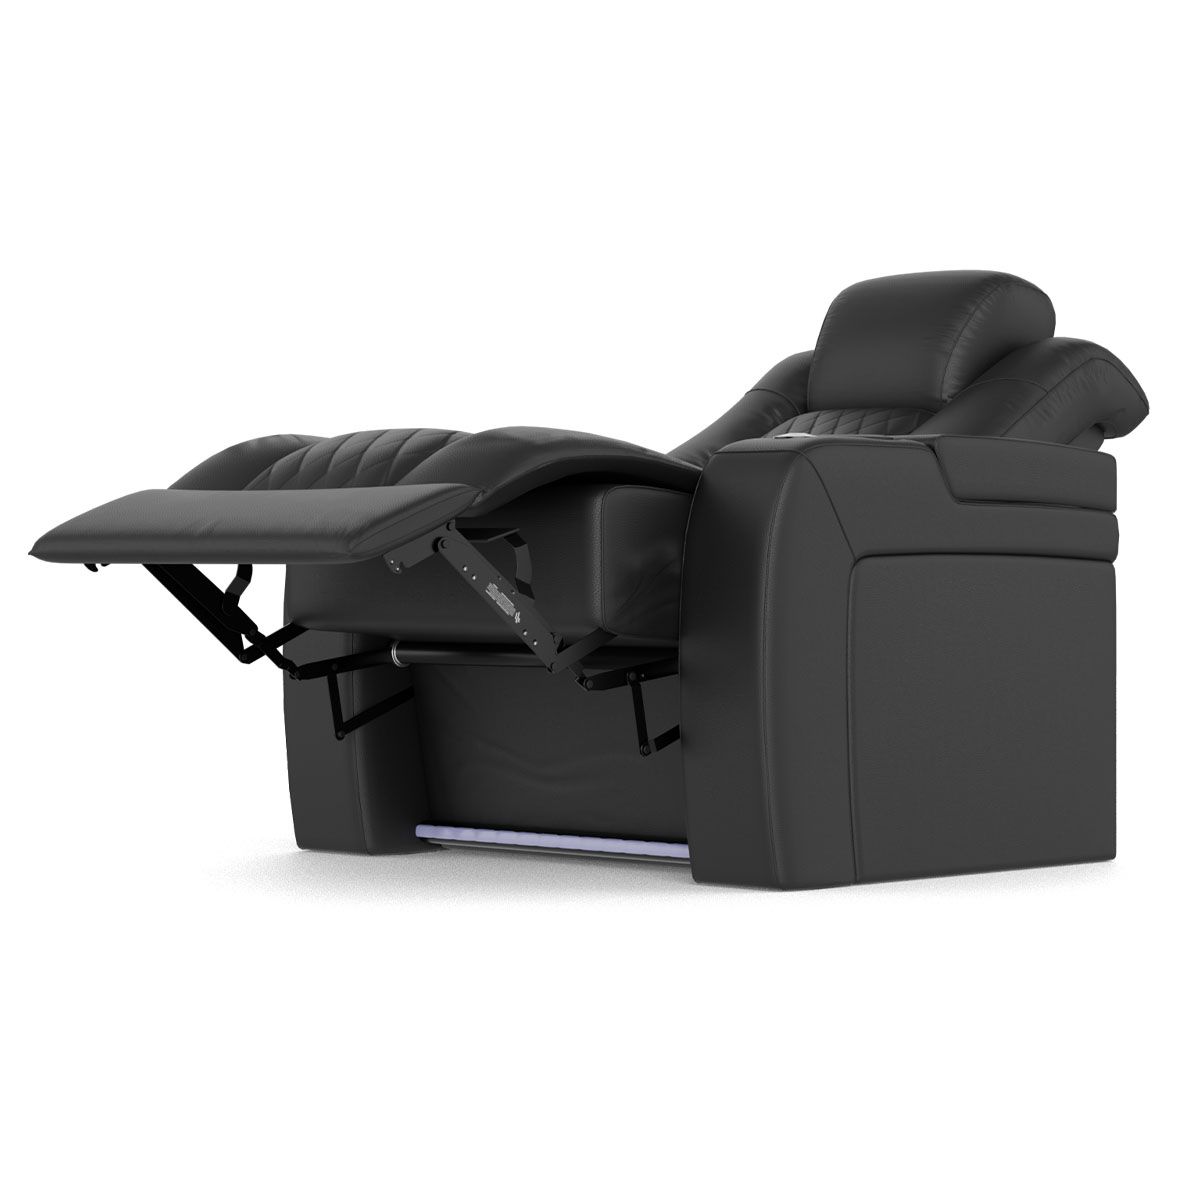 Audio Advice Revelation Home Theater Seating - right angled side view of reclined 2 arm chair